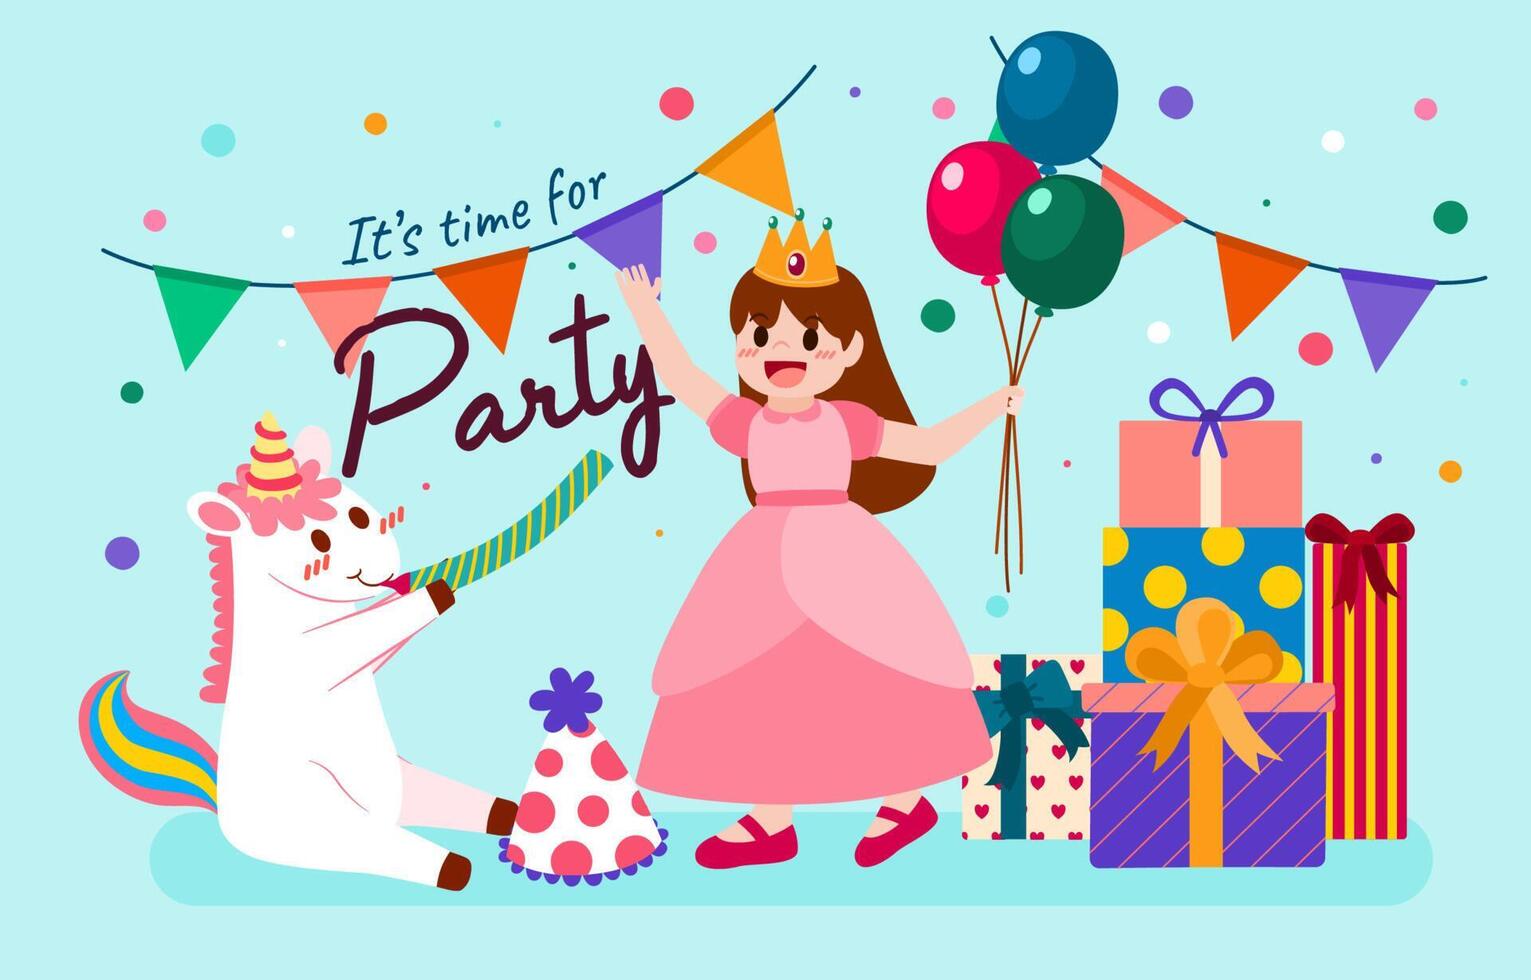 The children happy in party with lovely element vector